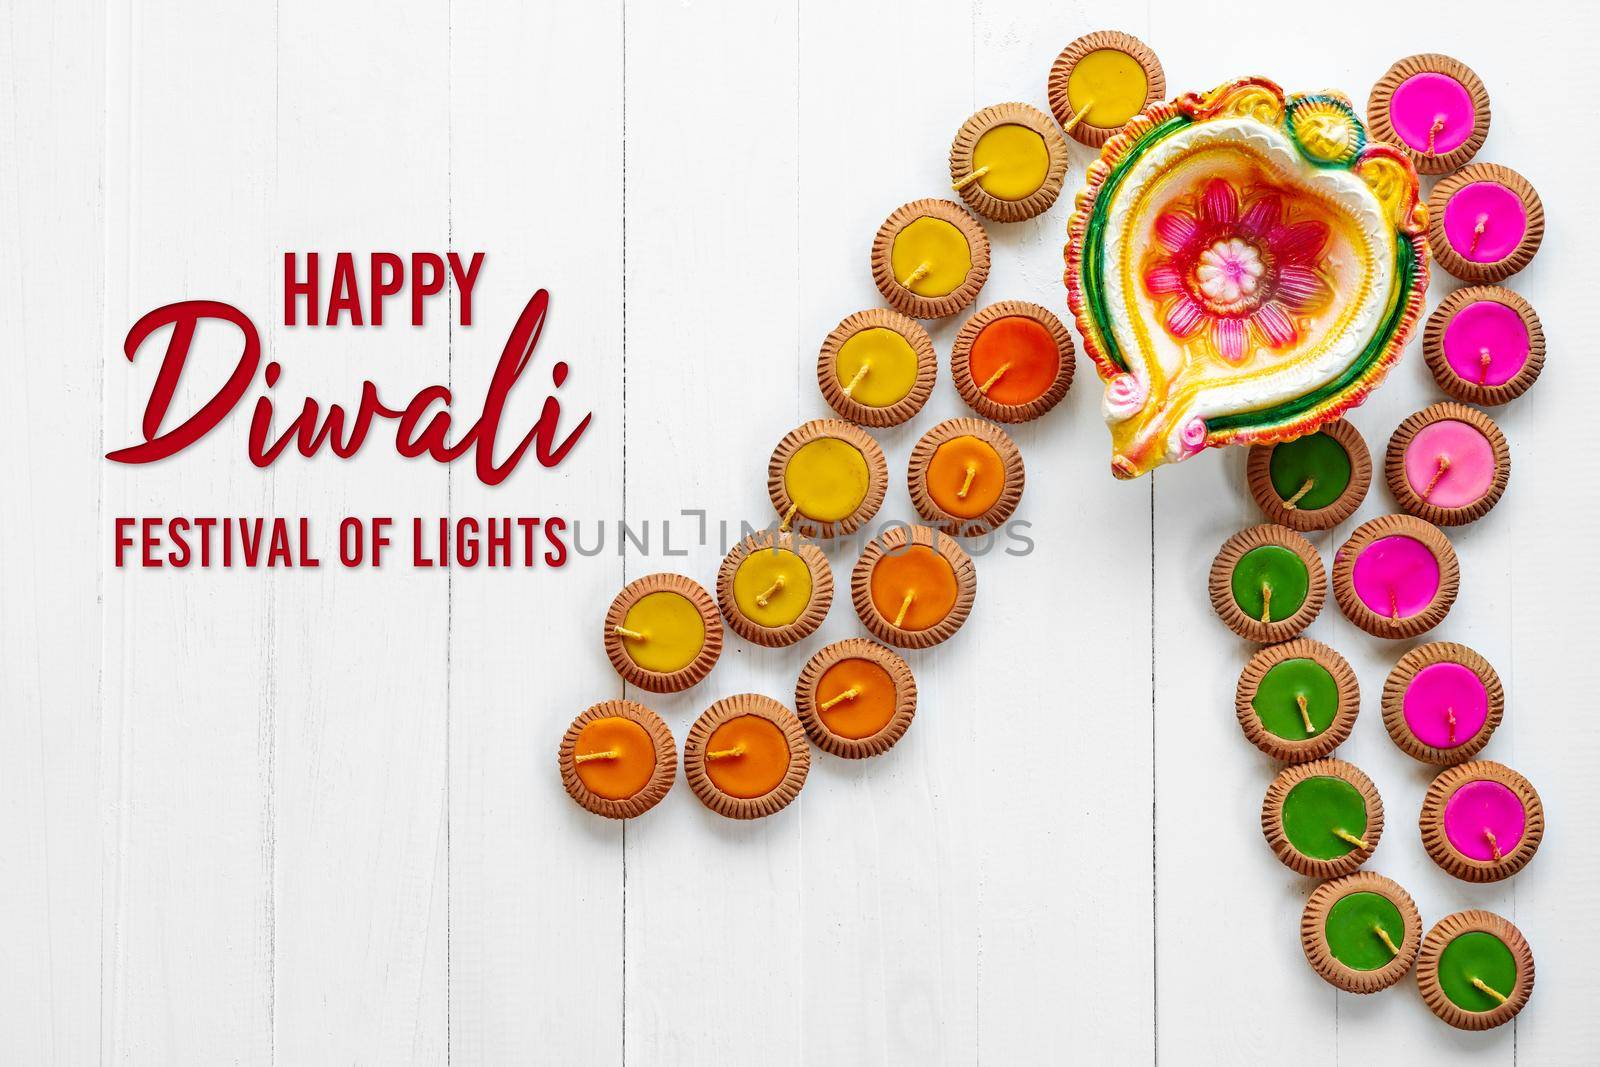 Happy Diwali - Clay Diya lamps lit during Dipavali, Hindu festival of lights celebration. Colorful traditional oil lamp diya on white wooden background by psodaz